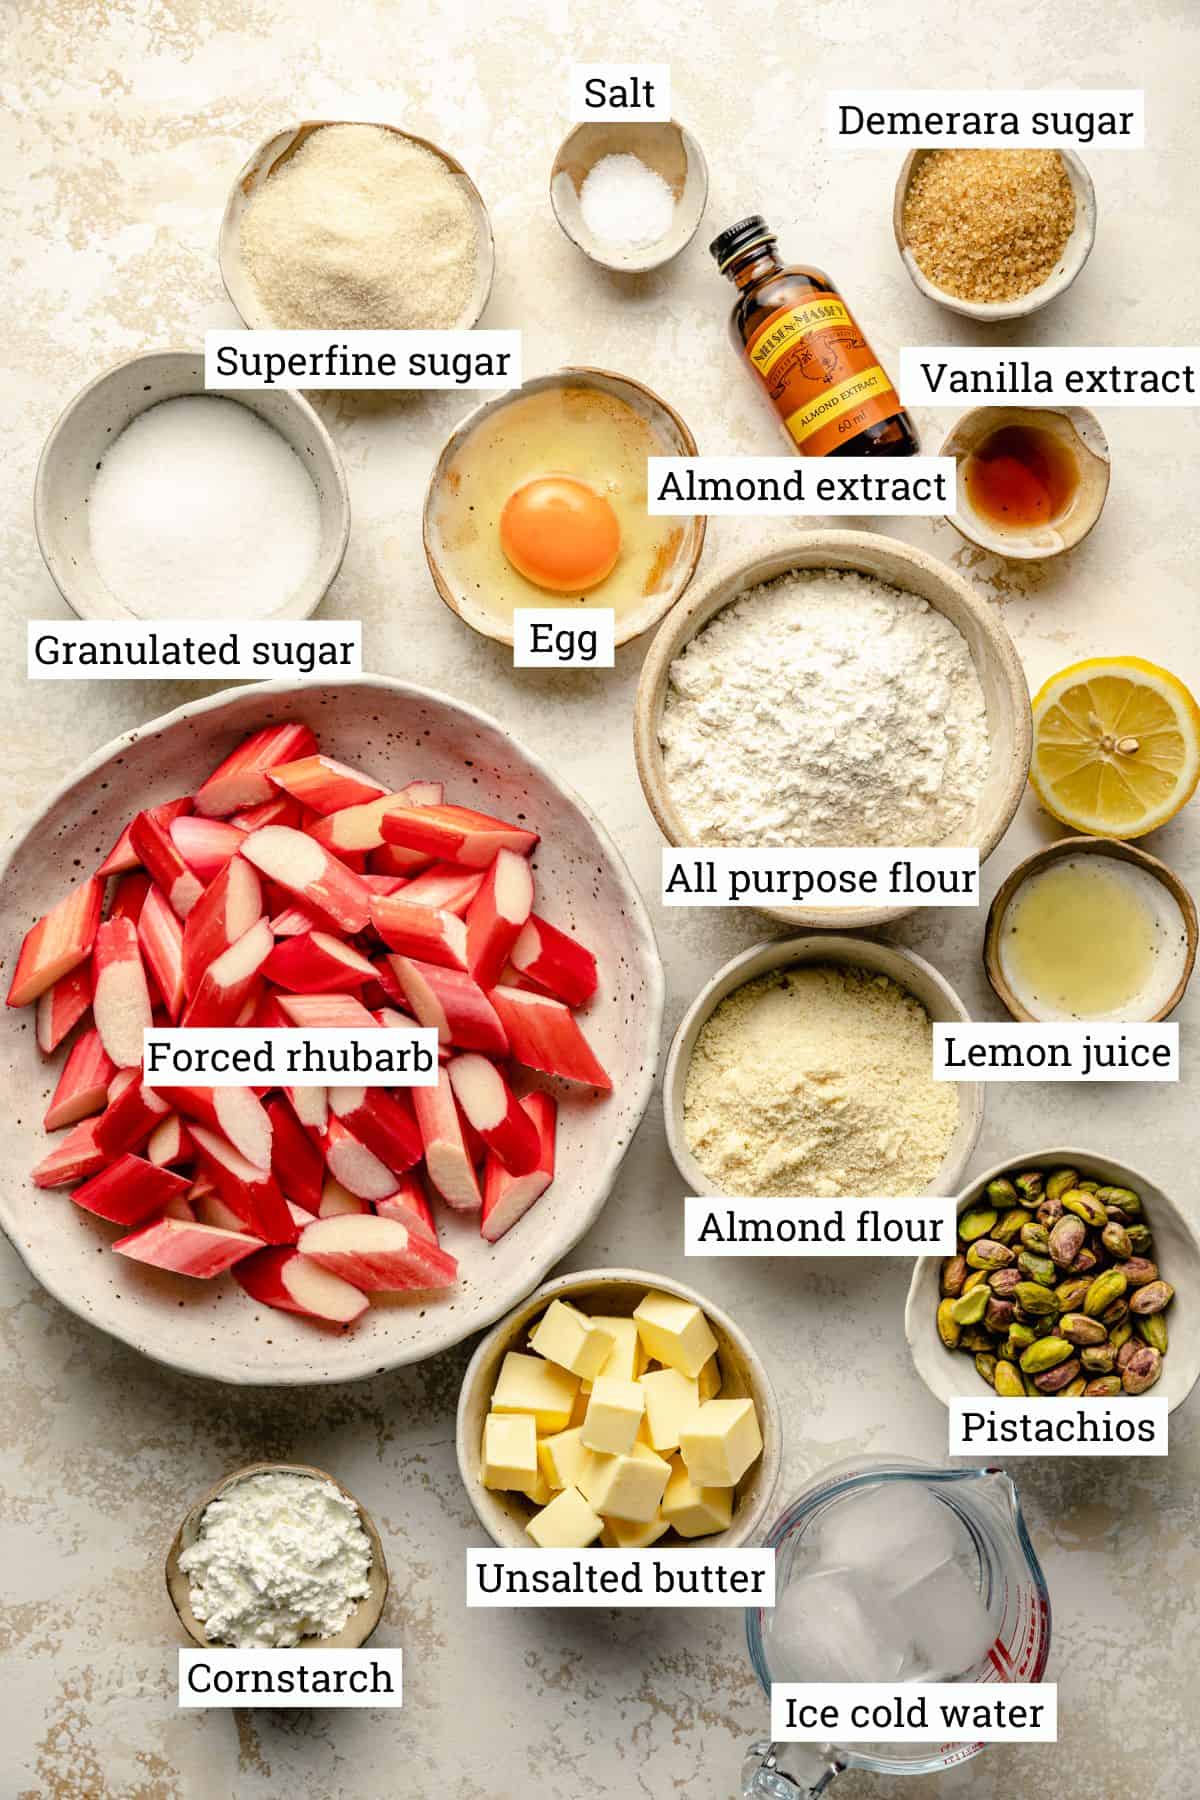 Ingredients in various bowls with labels.